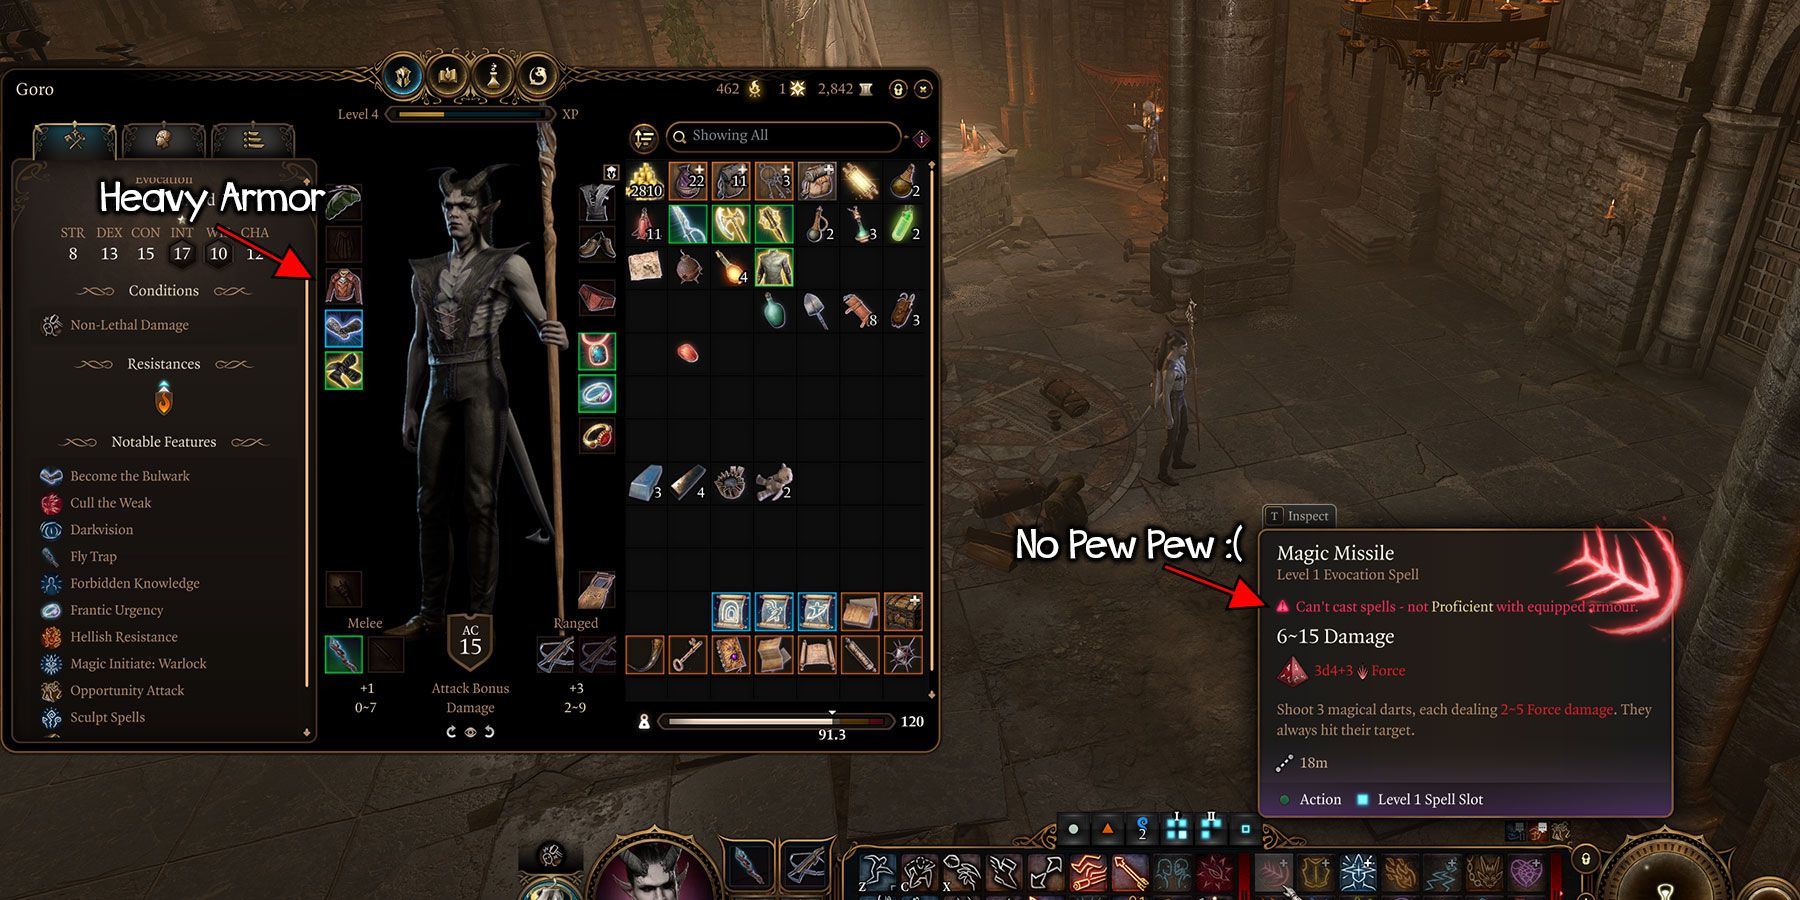 Equipping incorrect armor type affecting spellcasting in Baldur's Gate 3.